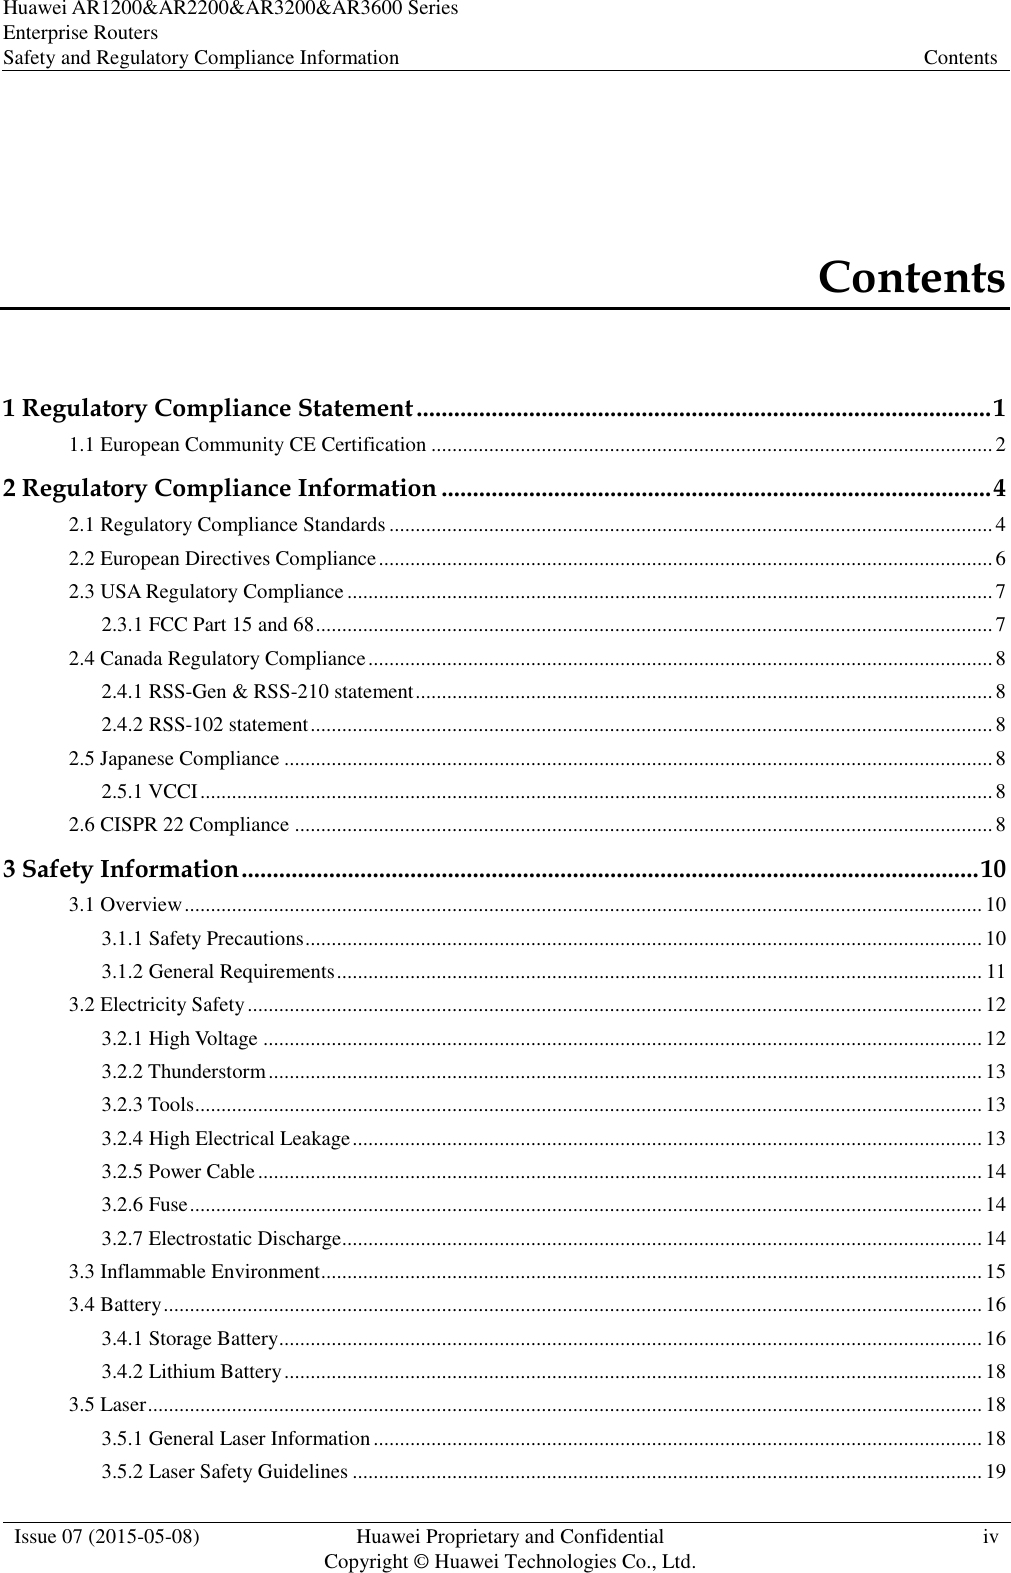 Huawei AR1200&amp;AR2200&amp;AR3200&amp;AR3600 Series Enterprise Routers Safety and Regulatory Compliance Information Contents  Issue 07 (2015-05-08) Huawei Proprietary and Confidential           Copyright © Huawei Technologies Co., Ltd. iv  Contents 1 Regulatory Compliance Statement ............................................................................................ 1 1.1 European Community CE Certification ........................................................................................................... 2 2 Regulatory Compliance Information ........................................................................................ 4 2.1 Regulatory Compliance Standards ................................................................................................................... 4 2.2 European Directives Compliance ..................................................................................................................... 6 2.3 USA Regulatory Compliance ........................................................................................................................... 7 2.3.1 FCC Part 15 and 68 ................................................................................................................................. 7 2.4 Canada Regulatory Compliance ....................................................................................................................... 8 2.4.1 RSS-Gen &amp; RSS-210 statement .............................................................................................................. 8 2.4.2 RSS-102 statement .................................................................................................................................. 8 2.5 Japanese Compliance ....................................................................................................................................... 8 2.5.1 VCCI ....................................................................................................................................................... 8 2.6 CISPR 22 Compliance ..................................................................................................................................... 8 3 Safety Information ...................................................................................................................... 10 3.1 Overview ........................................................................................................................................................ 10 3.1.1 Safety Precautions ................................................................................................................................. 10 3.1.2 General Requirements ........................................................................................................................... 11 3.2 Electricity Safety ............................................................................................................................................ 12 3.2.1 High Voltage ......................................................................................................................................... 12 3.2.2 Thunderstorm ........................................................................................................................................ 13 3.2.3 Tools ...................................................................................................................................................... 13 3.2.4 High Electrical Leakage ........................................................................................................................ 13 3.2.5 Power Cable .......................................................................................................................................... 14 3.2.6 Fuse ....................................................................................................................................................... 14 3.2.7 Electrostatic Discharge.......................................................................................................................... 14 3.3 Inflammable Environment .............................................................................................................................. 15 3.4 Battery ............................................................................................................................................................ 16 3.4.1 Storage Battery ...................................................................................................................................... 16 3.4.2 Lithium Battery ..................................................................................................................................... 18 3.5 Laser ............................................................................................................................................................... 18 3.5.1 General Laser Information .................................................................................................................... 18 3.5.2 Laser Safety Guidelines ........................................................................................................................ 19 